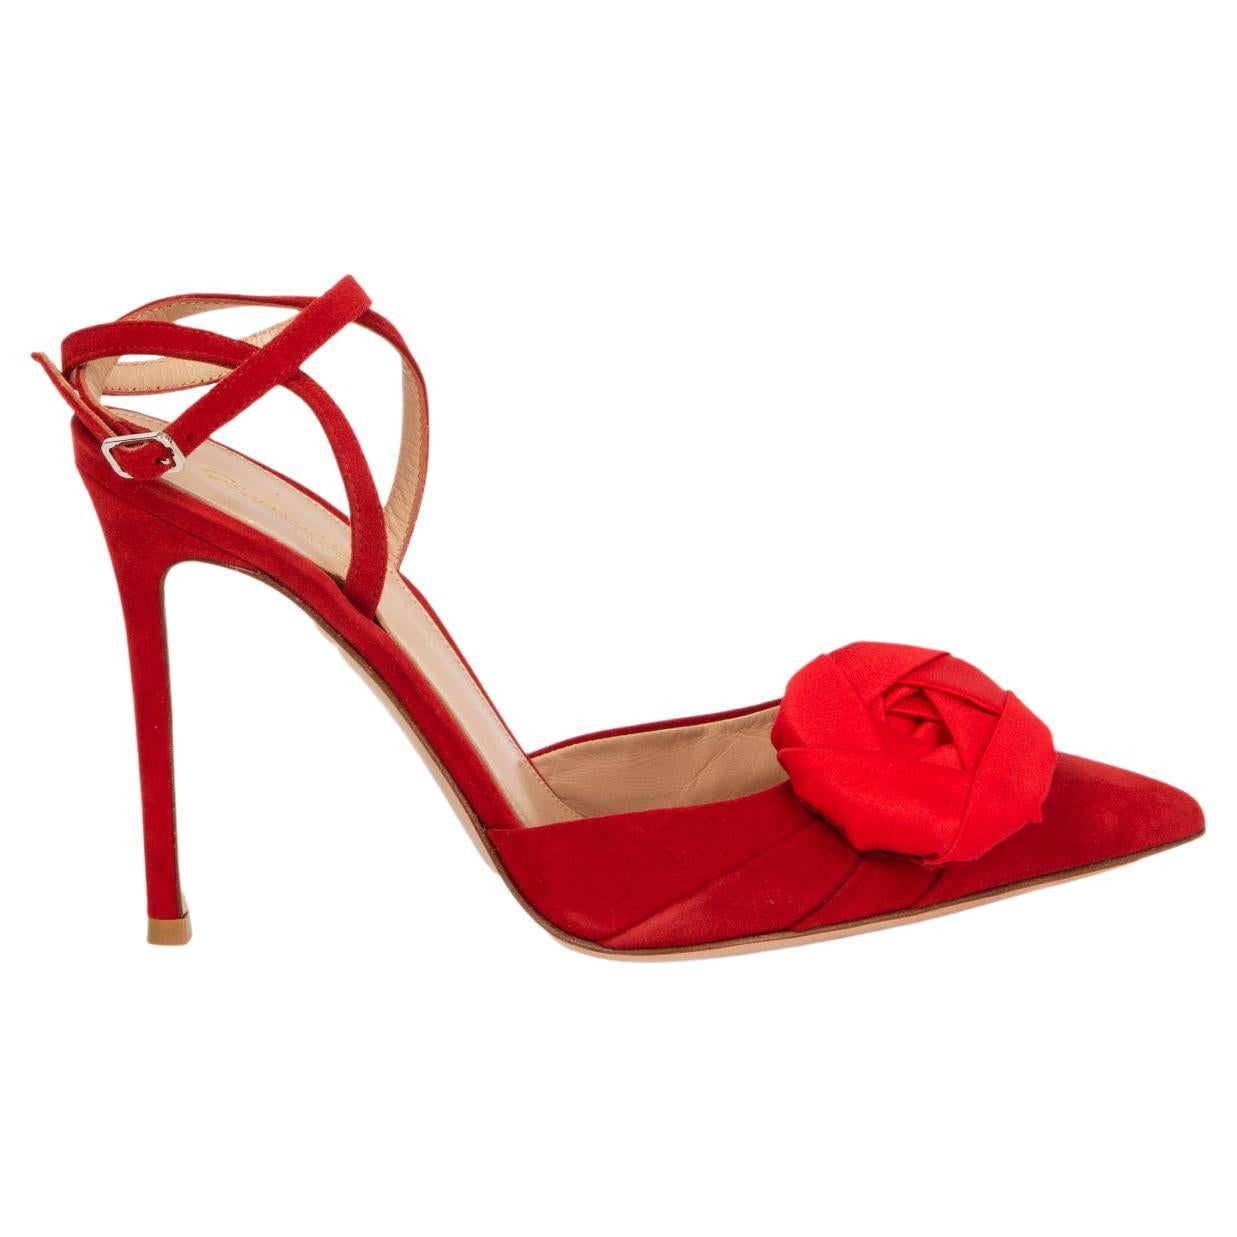 GIANVITO ROSSI red suede SATIN ROSE ANKLE STRAP PUMPS Shoes 37 For Sale